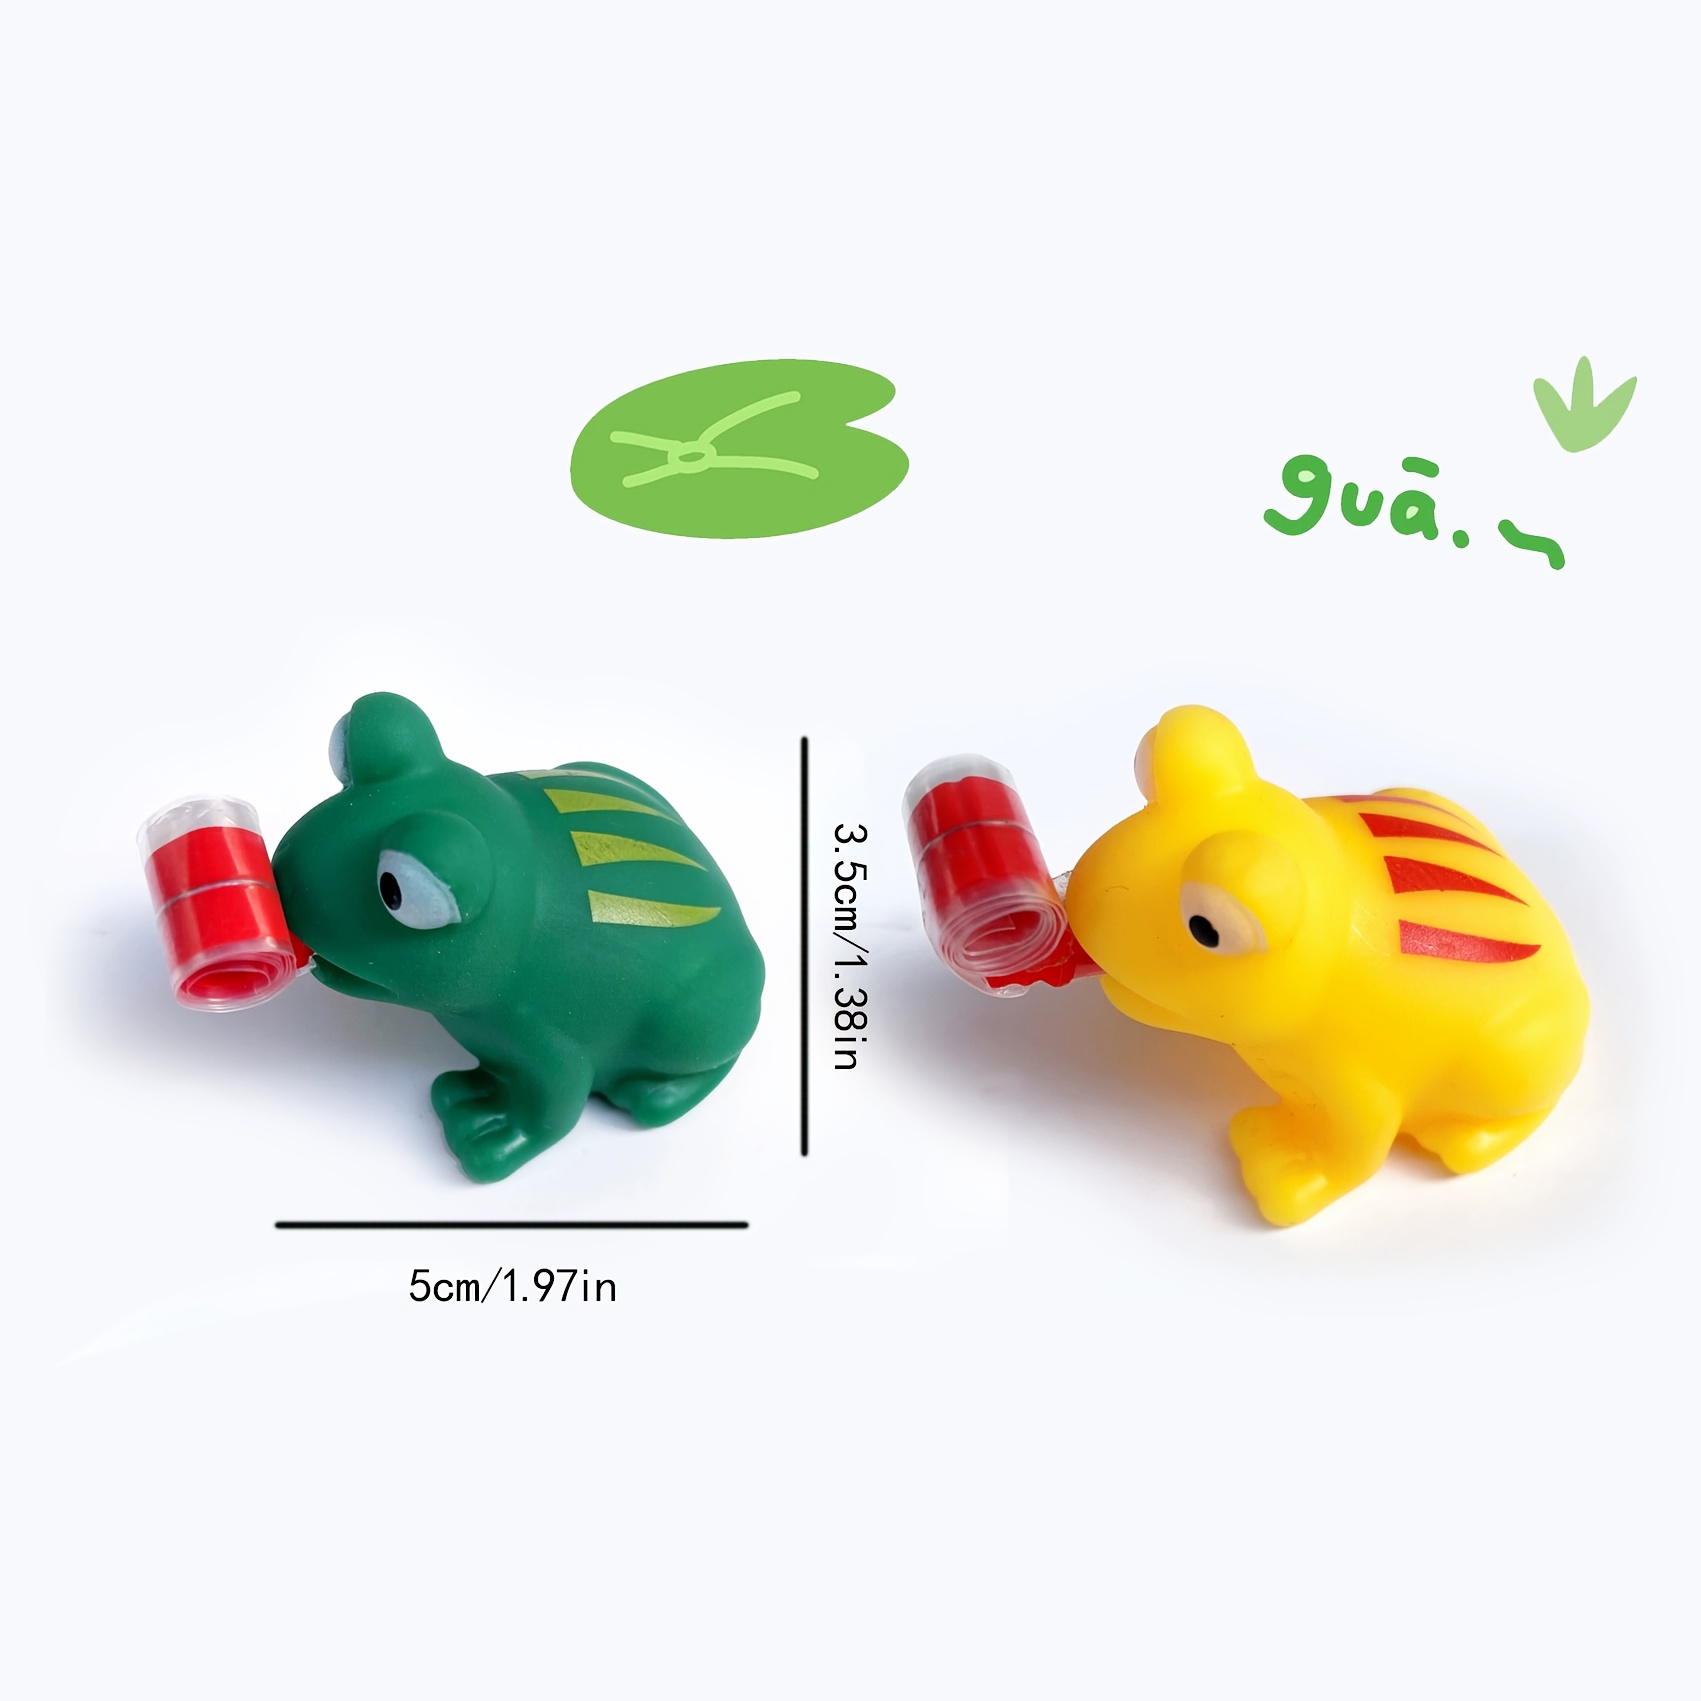 Funny Simulation Frog Squeeze Toy Squishies Cute Rubber Frog Stress Relief  Toy Tricky Spoof Props Gags & Practical Jokes Gift - Squeeze Toys -  AliExpress